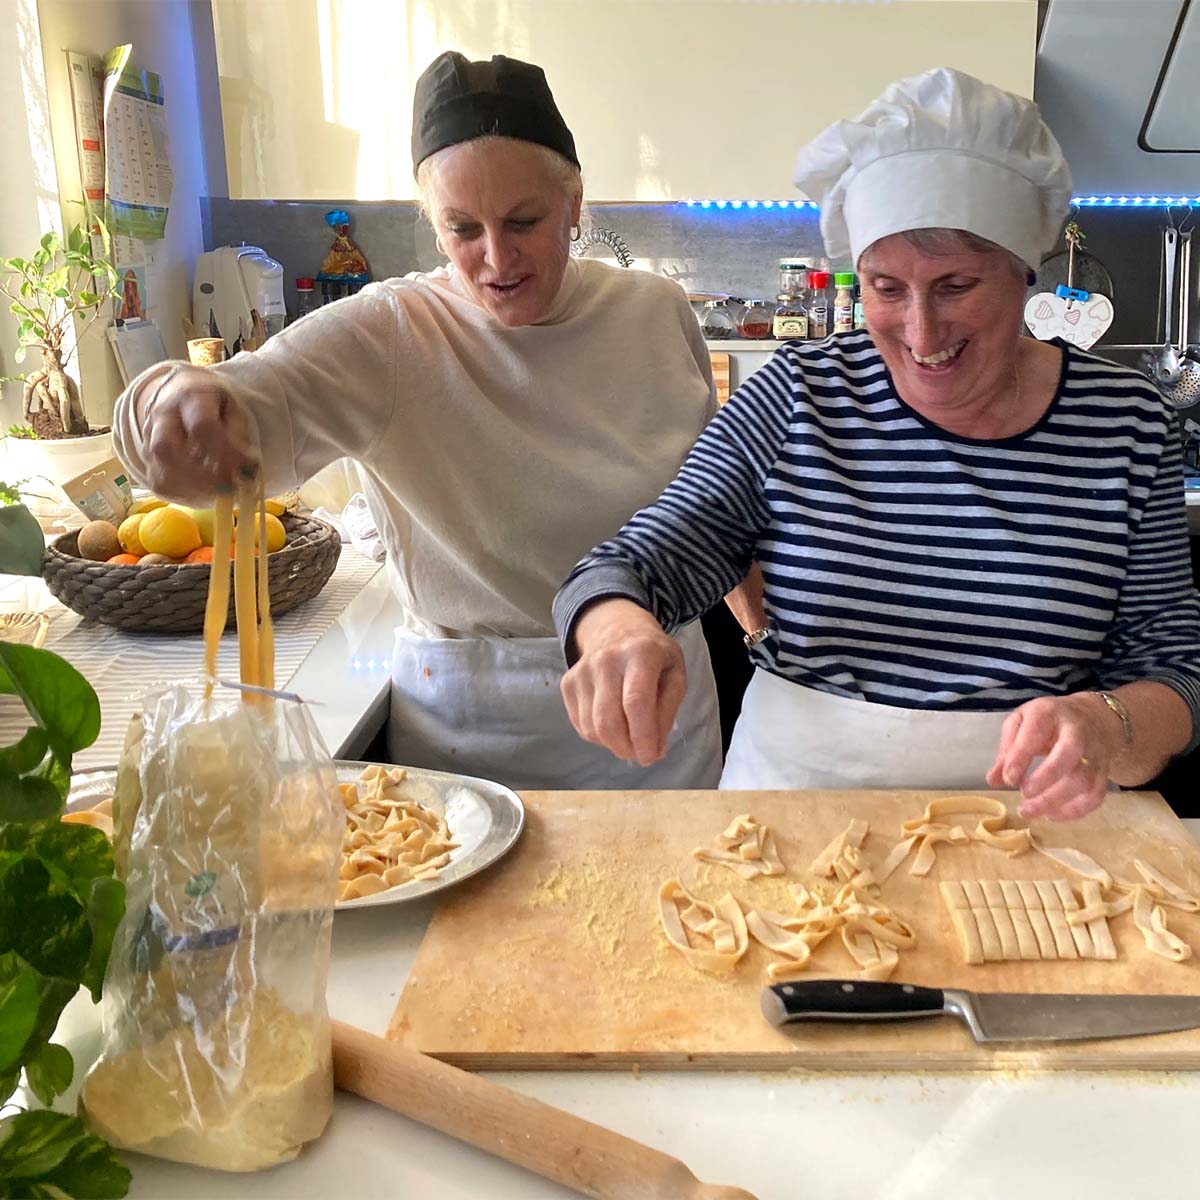 Taylor Made Homestay Italian Language Courses for adults in Italy - Learning by cooking Italian food